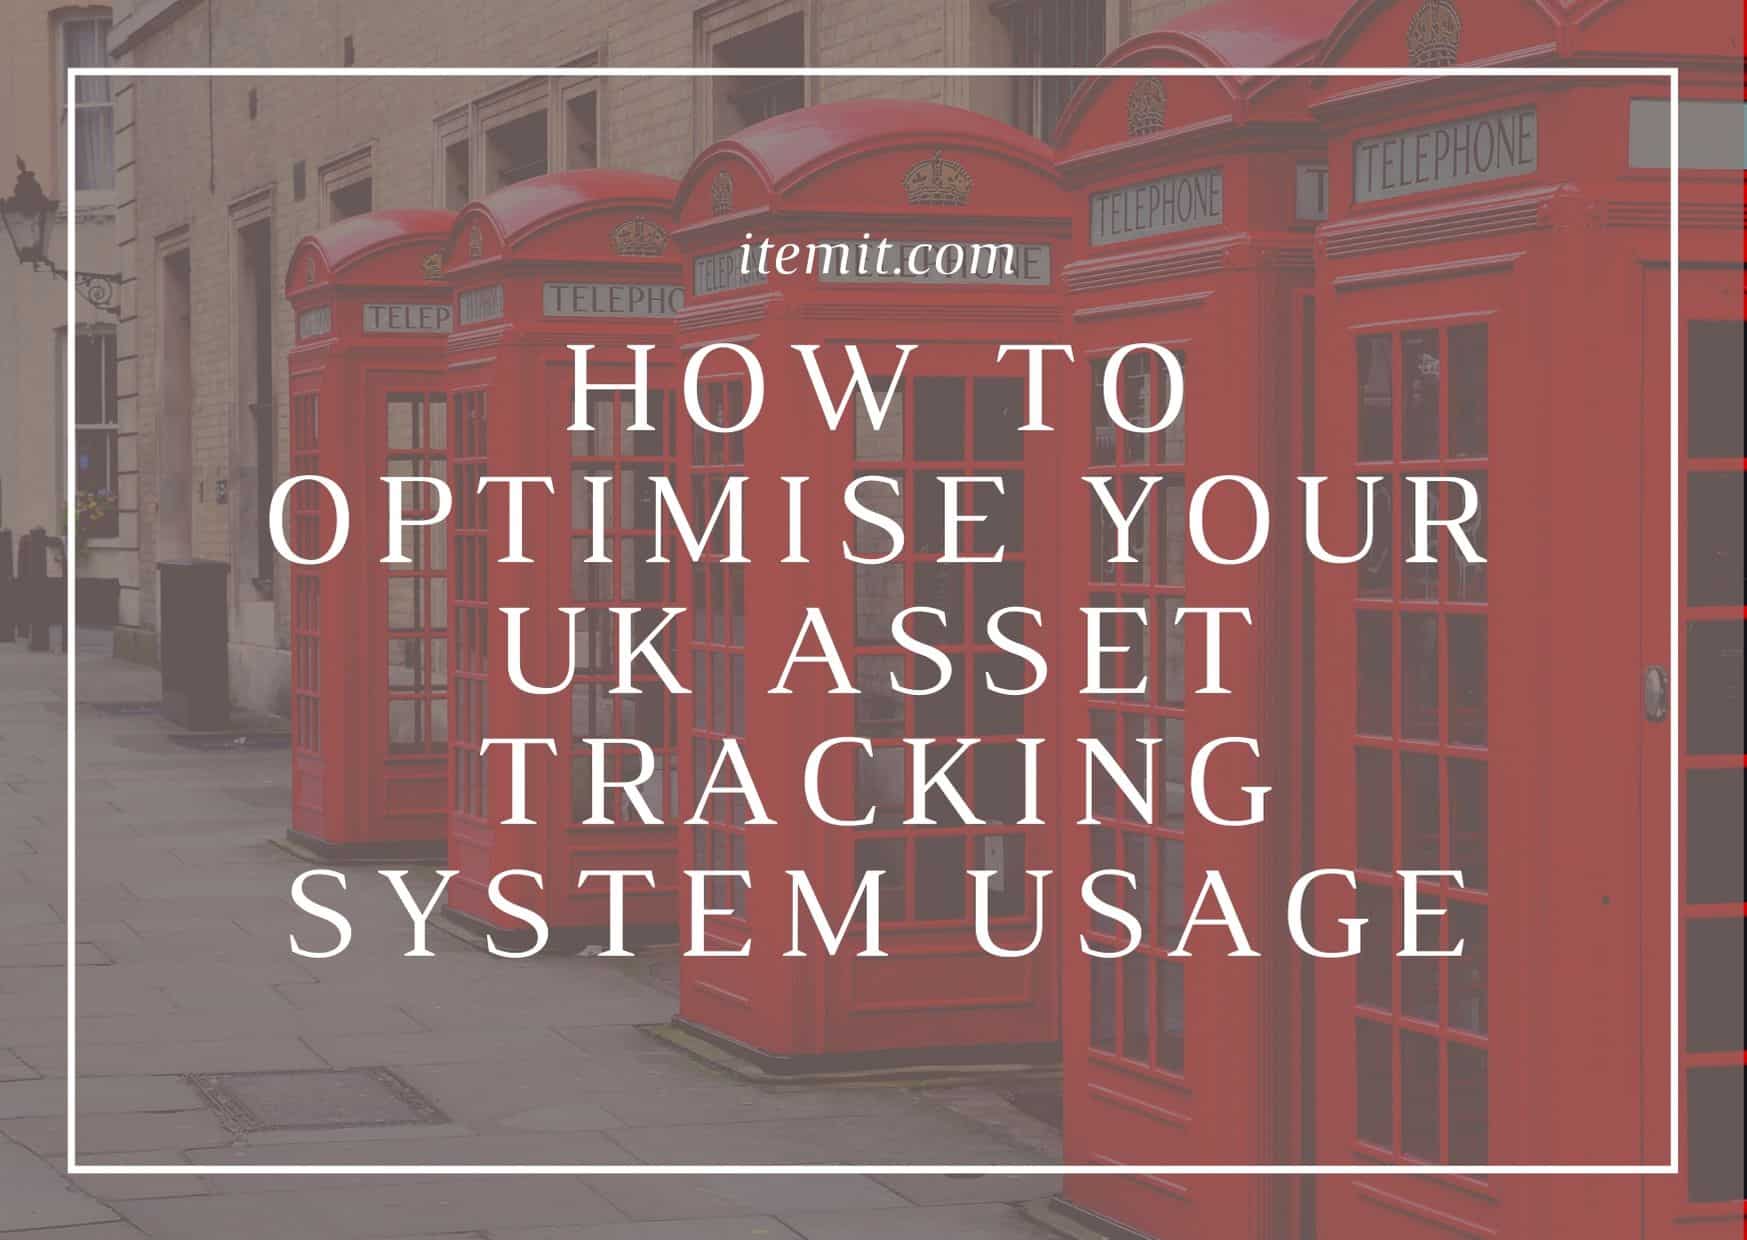 How to Optimise Your UK Asset Tracking System Usage